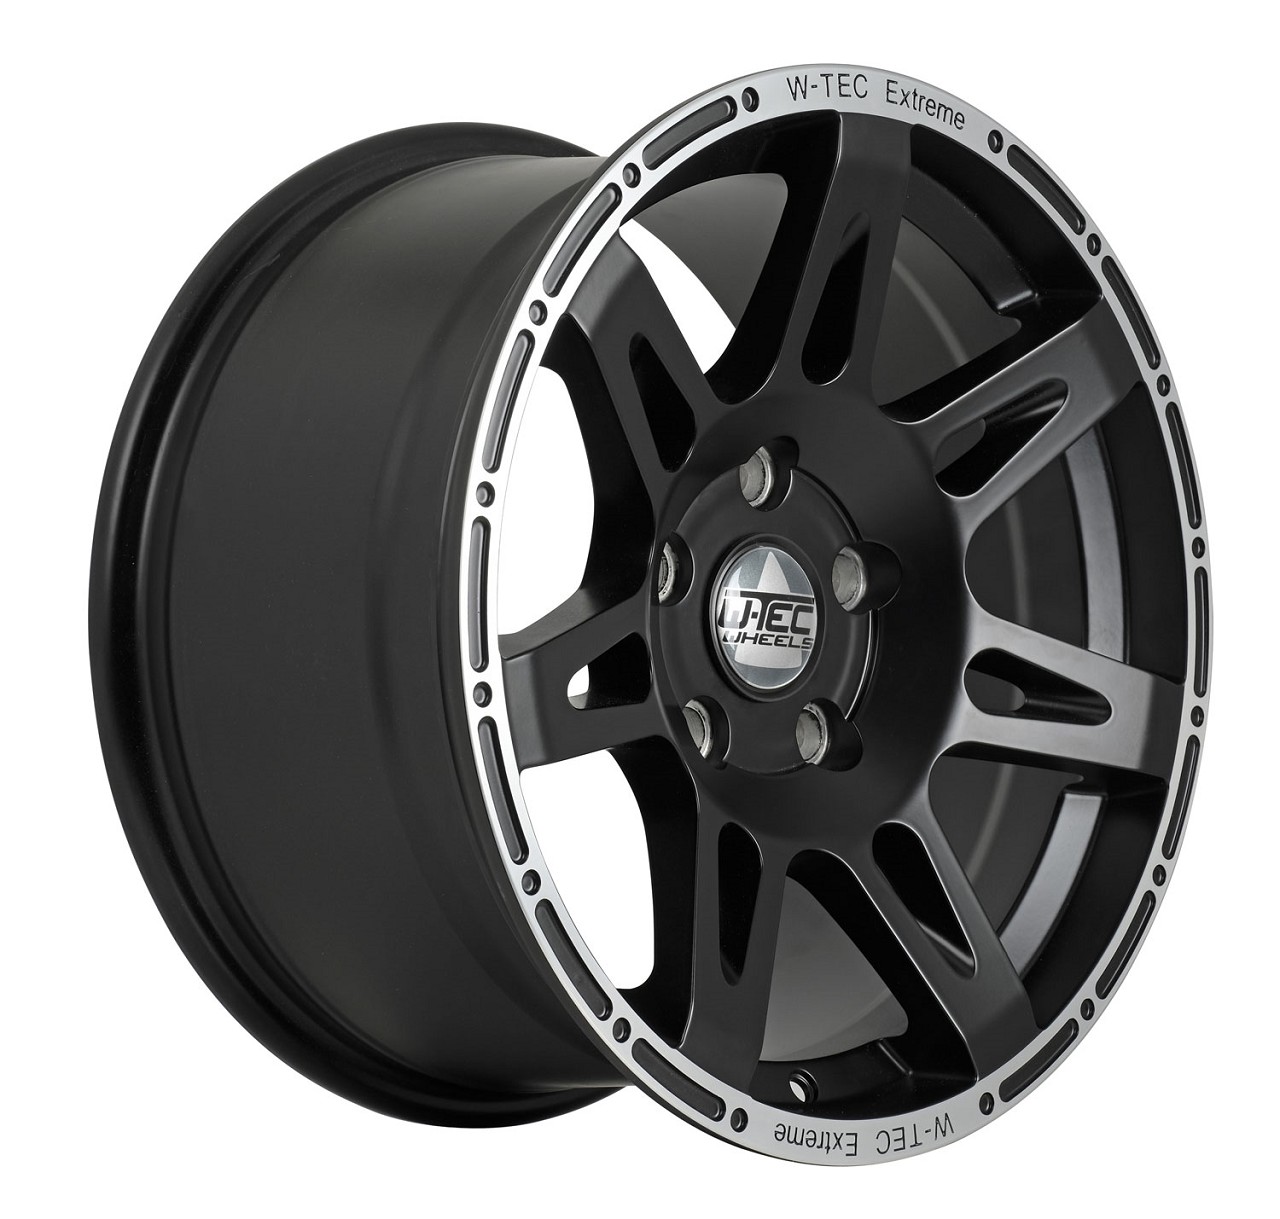 1x Alloy wheel W-TEC Extreme black-silver 8,5x17 offset+30 fits Jeep Commander WH (2006-2010)